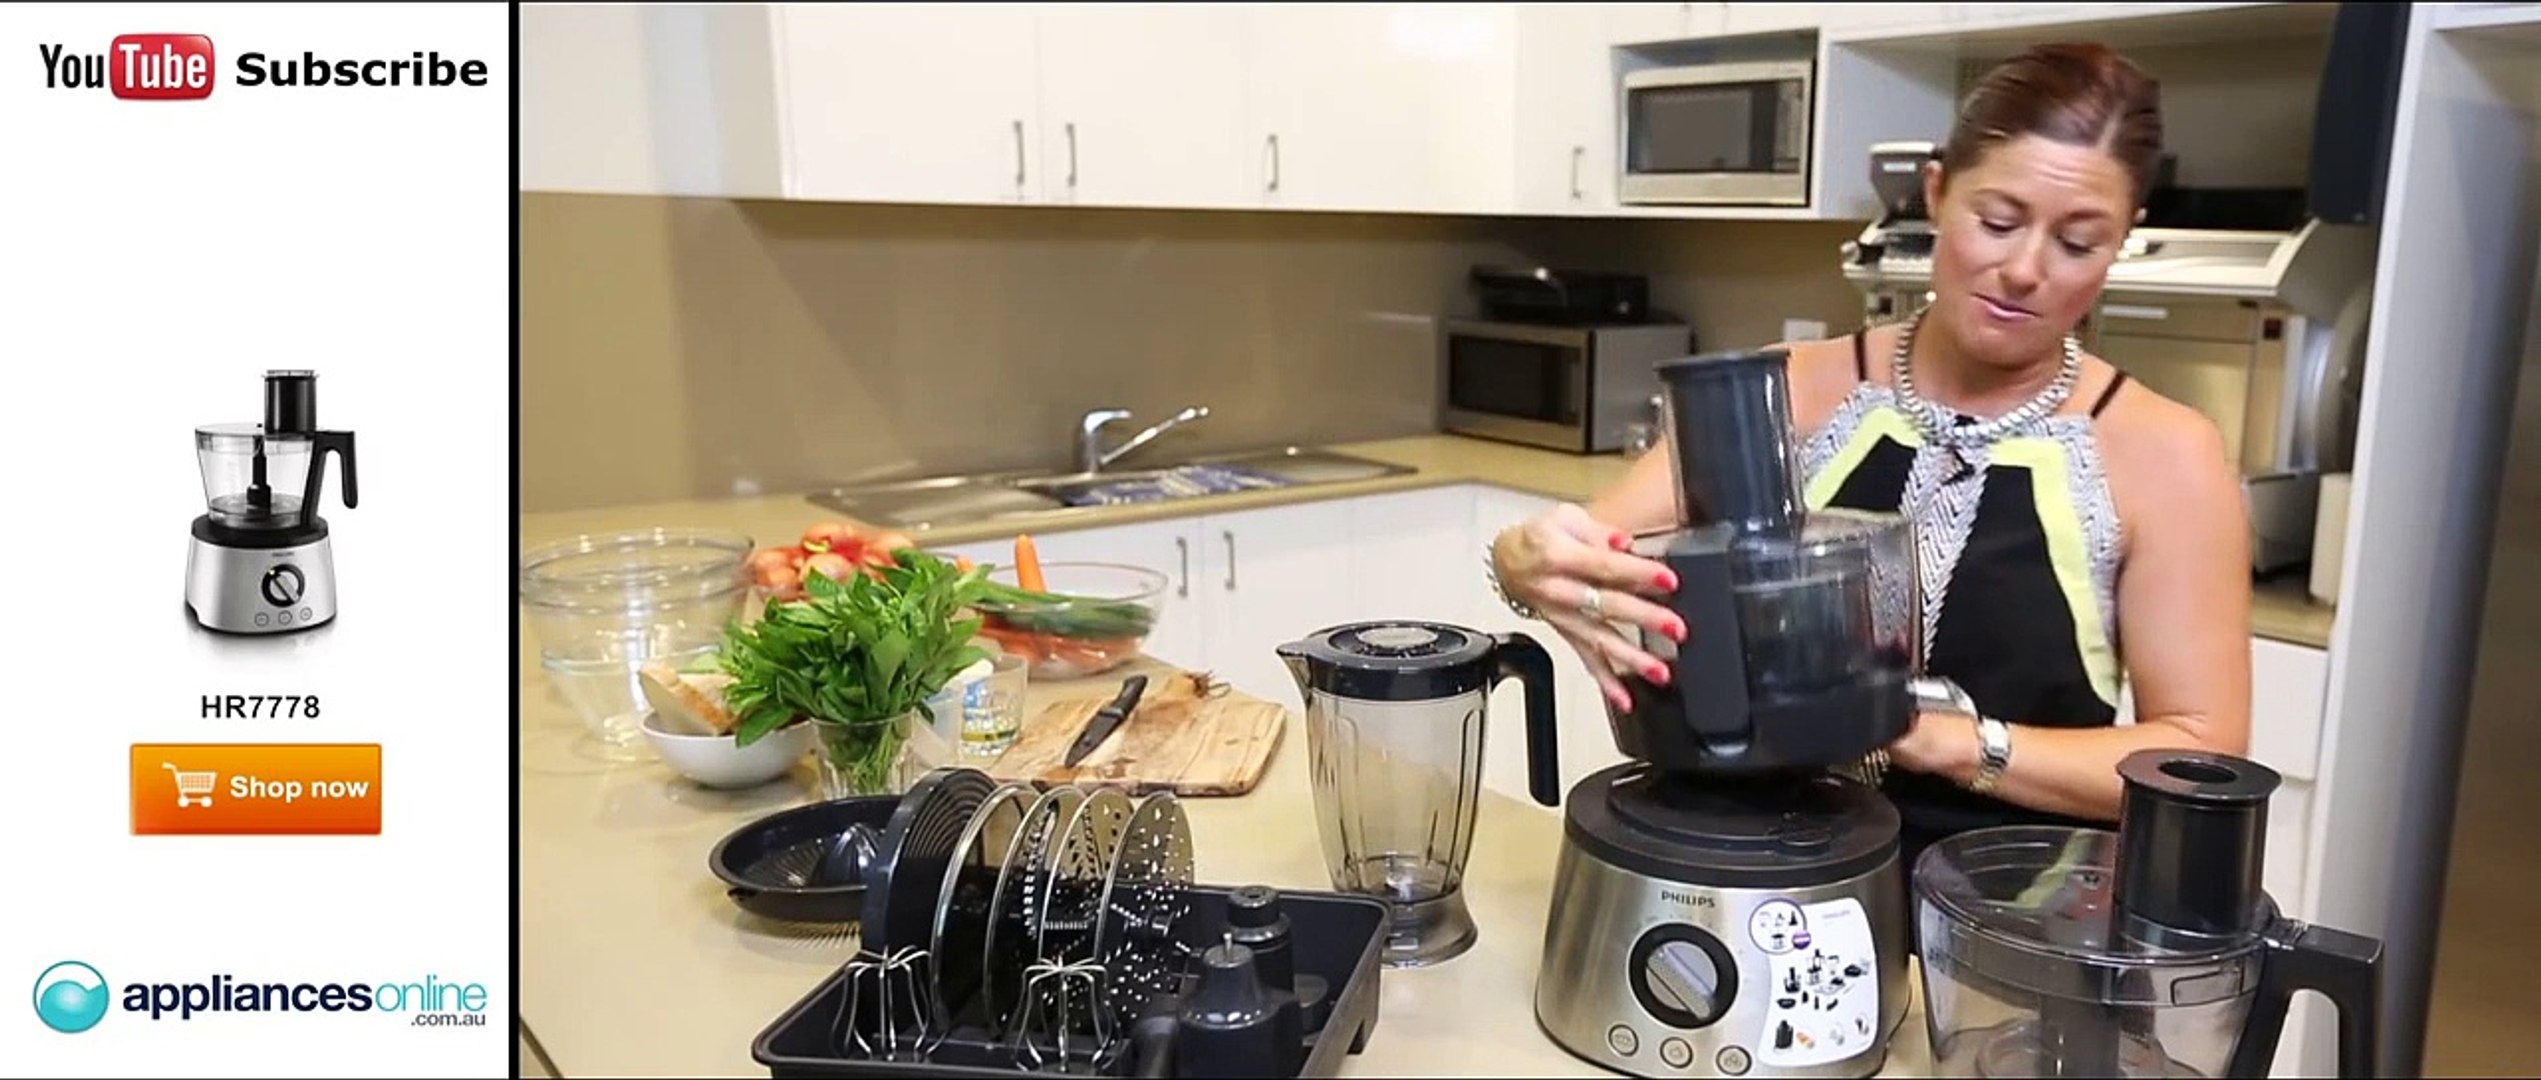 Philips HR7778 food processor reviewed by expert - Appliances Online -  video Dailymotion